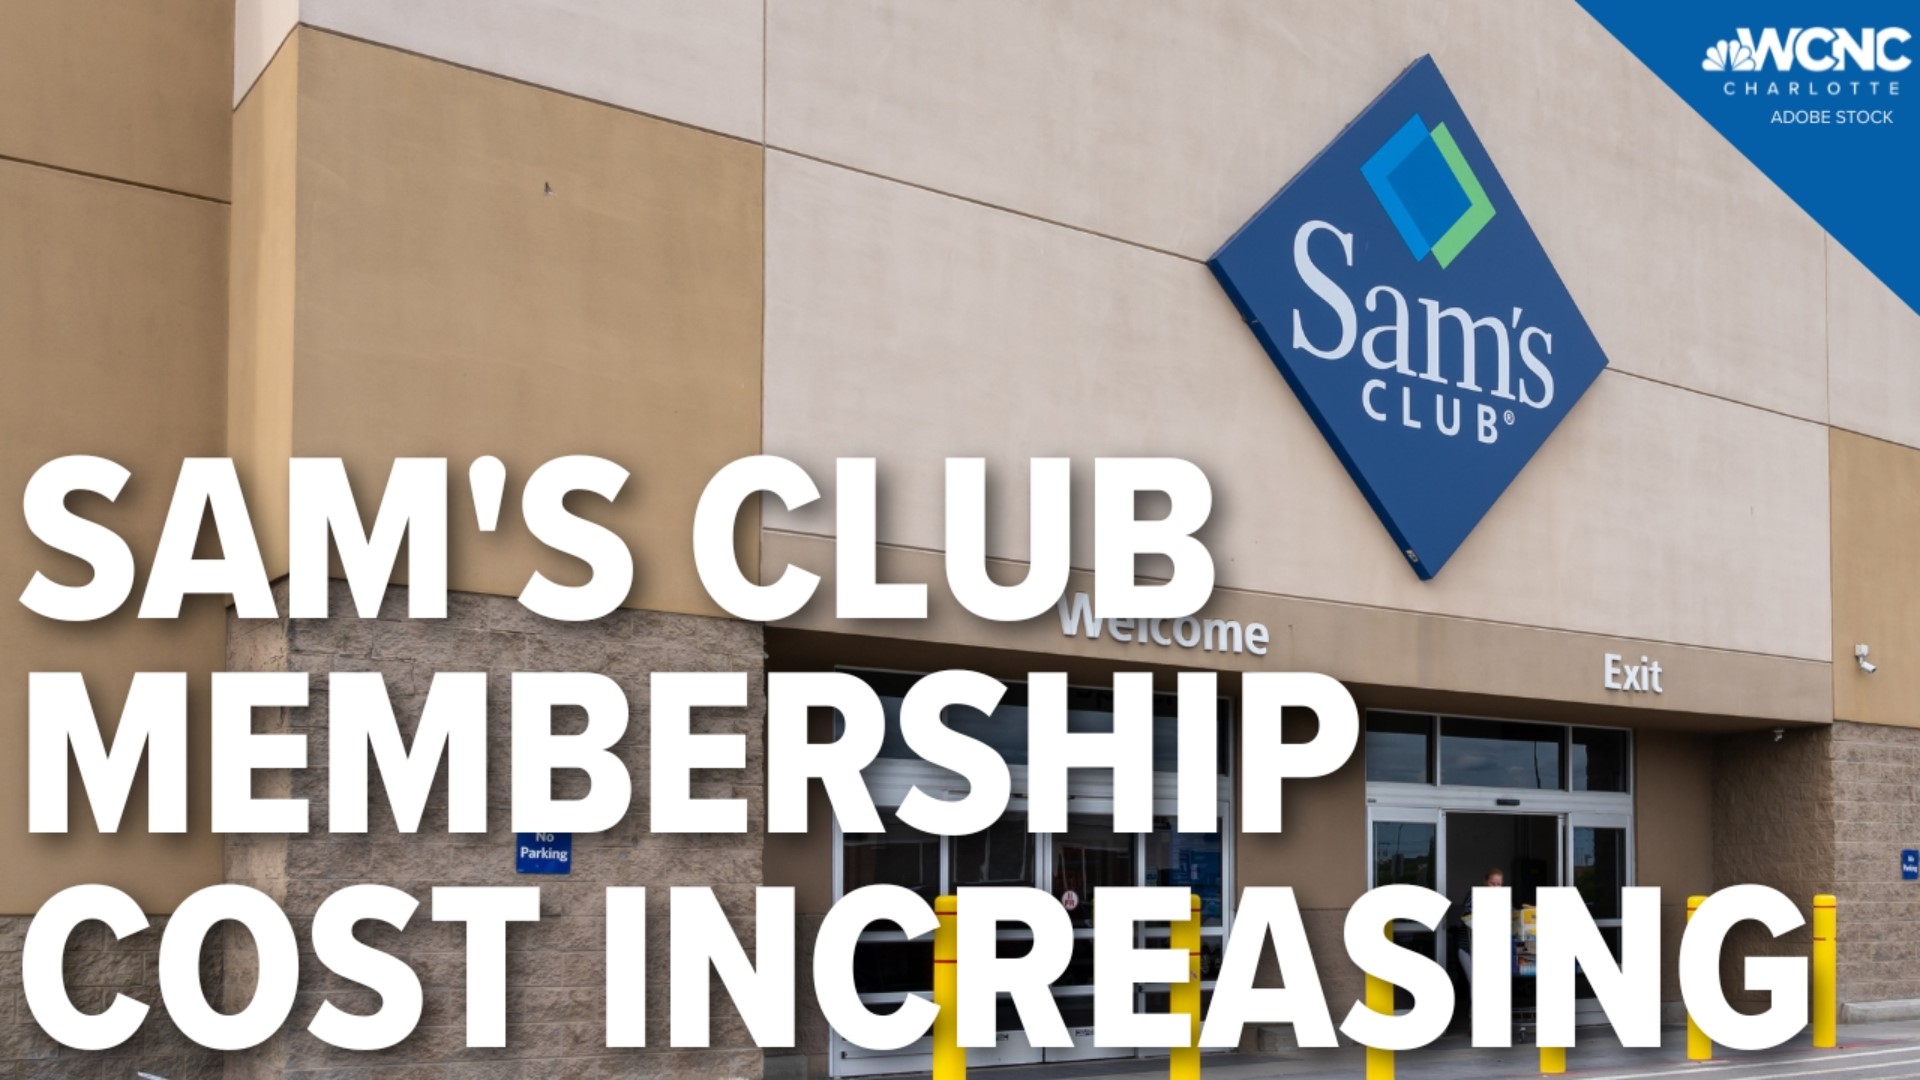 Buying in bulk at a warehouse club to cut grocery costs is a popular strategy to save money, but now one club is increasing its membership cost.